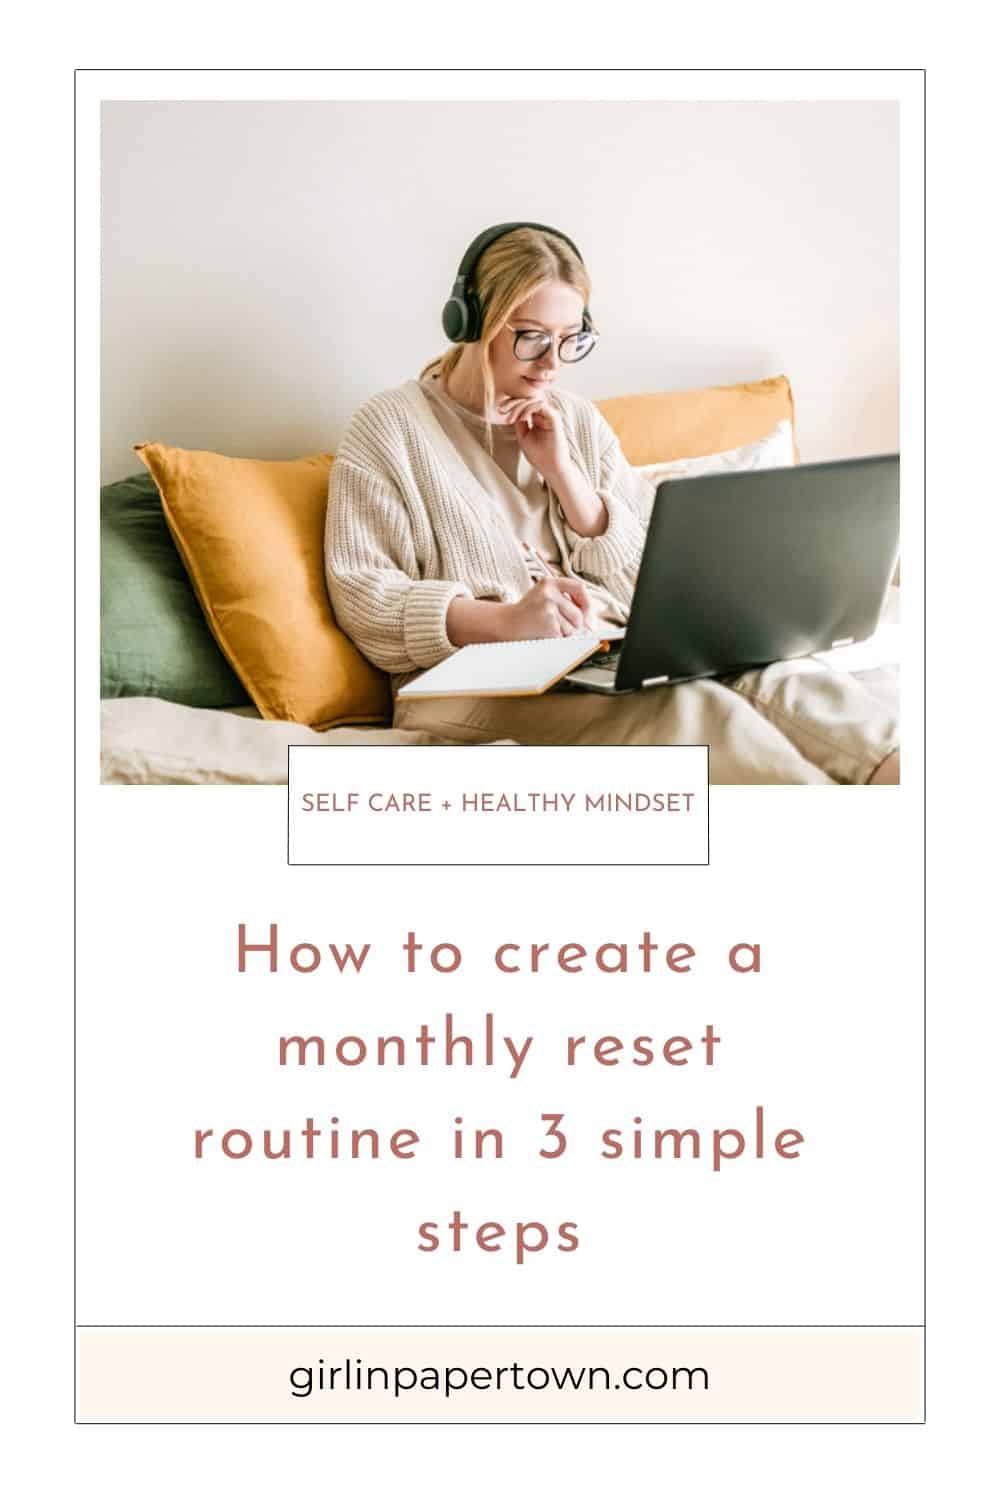 Self care + healthy mindset - How to create a monthly reset routine in 3 simple steps